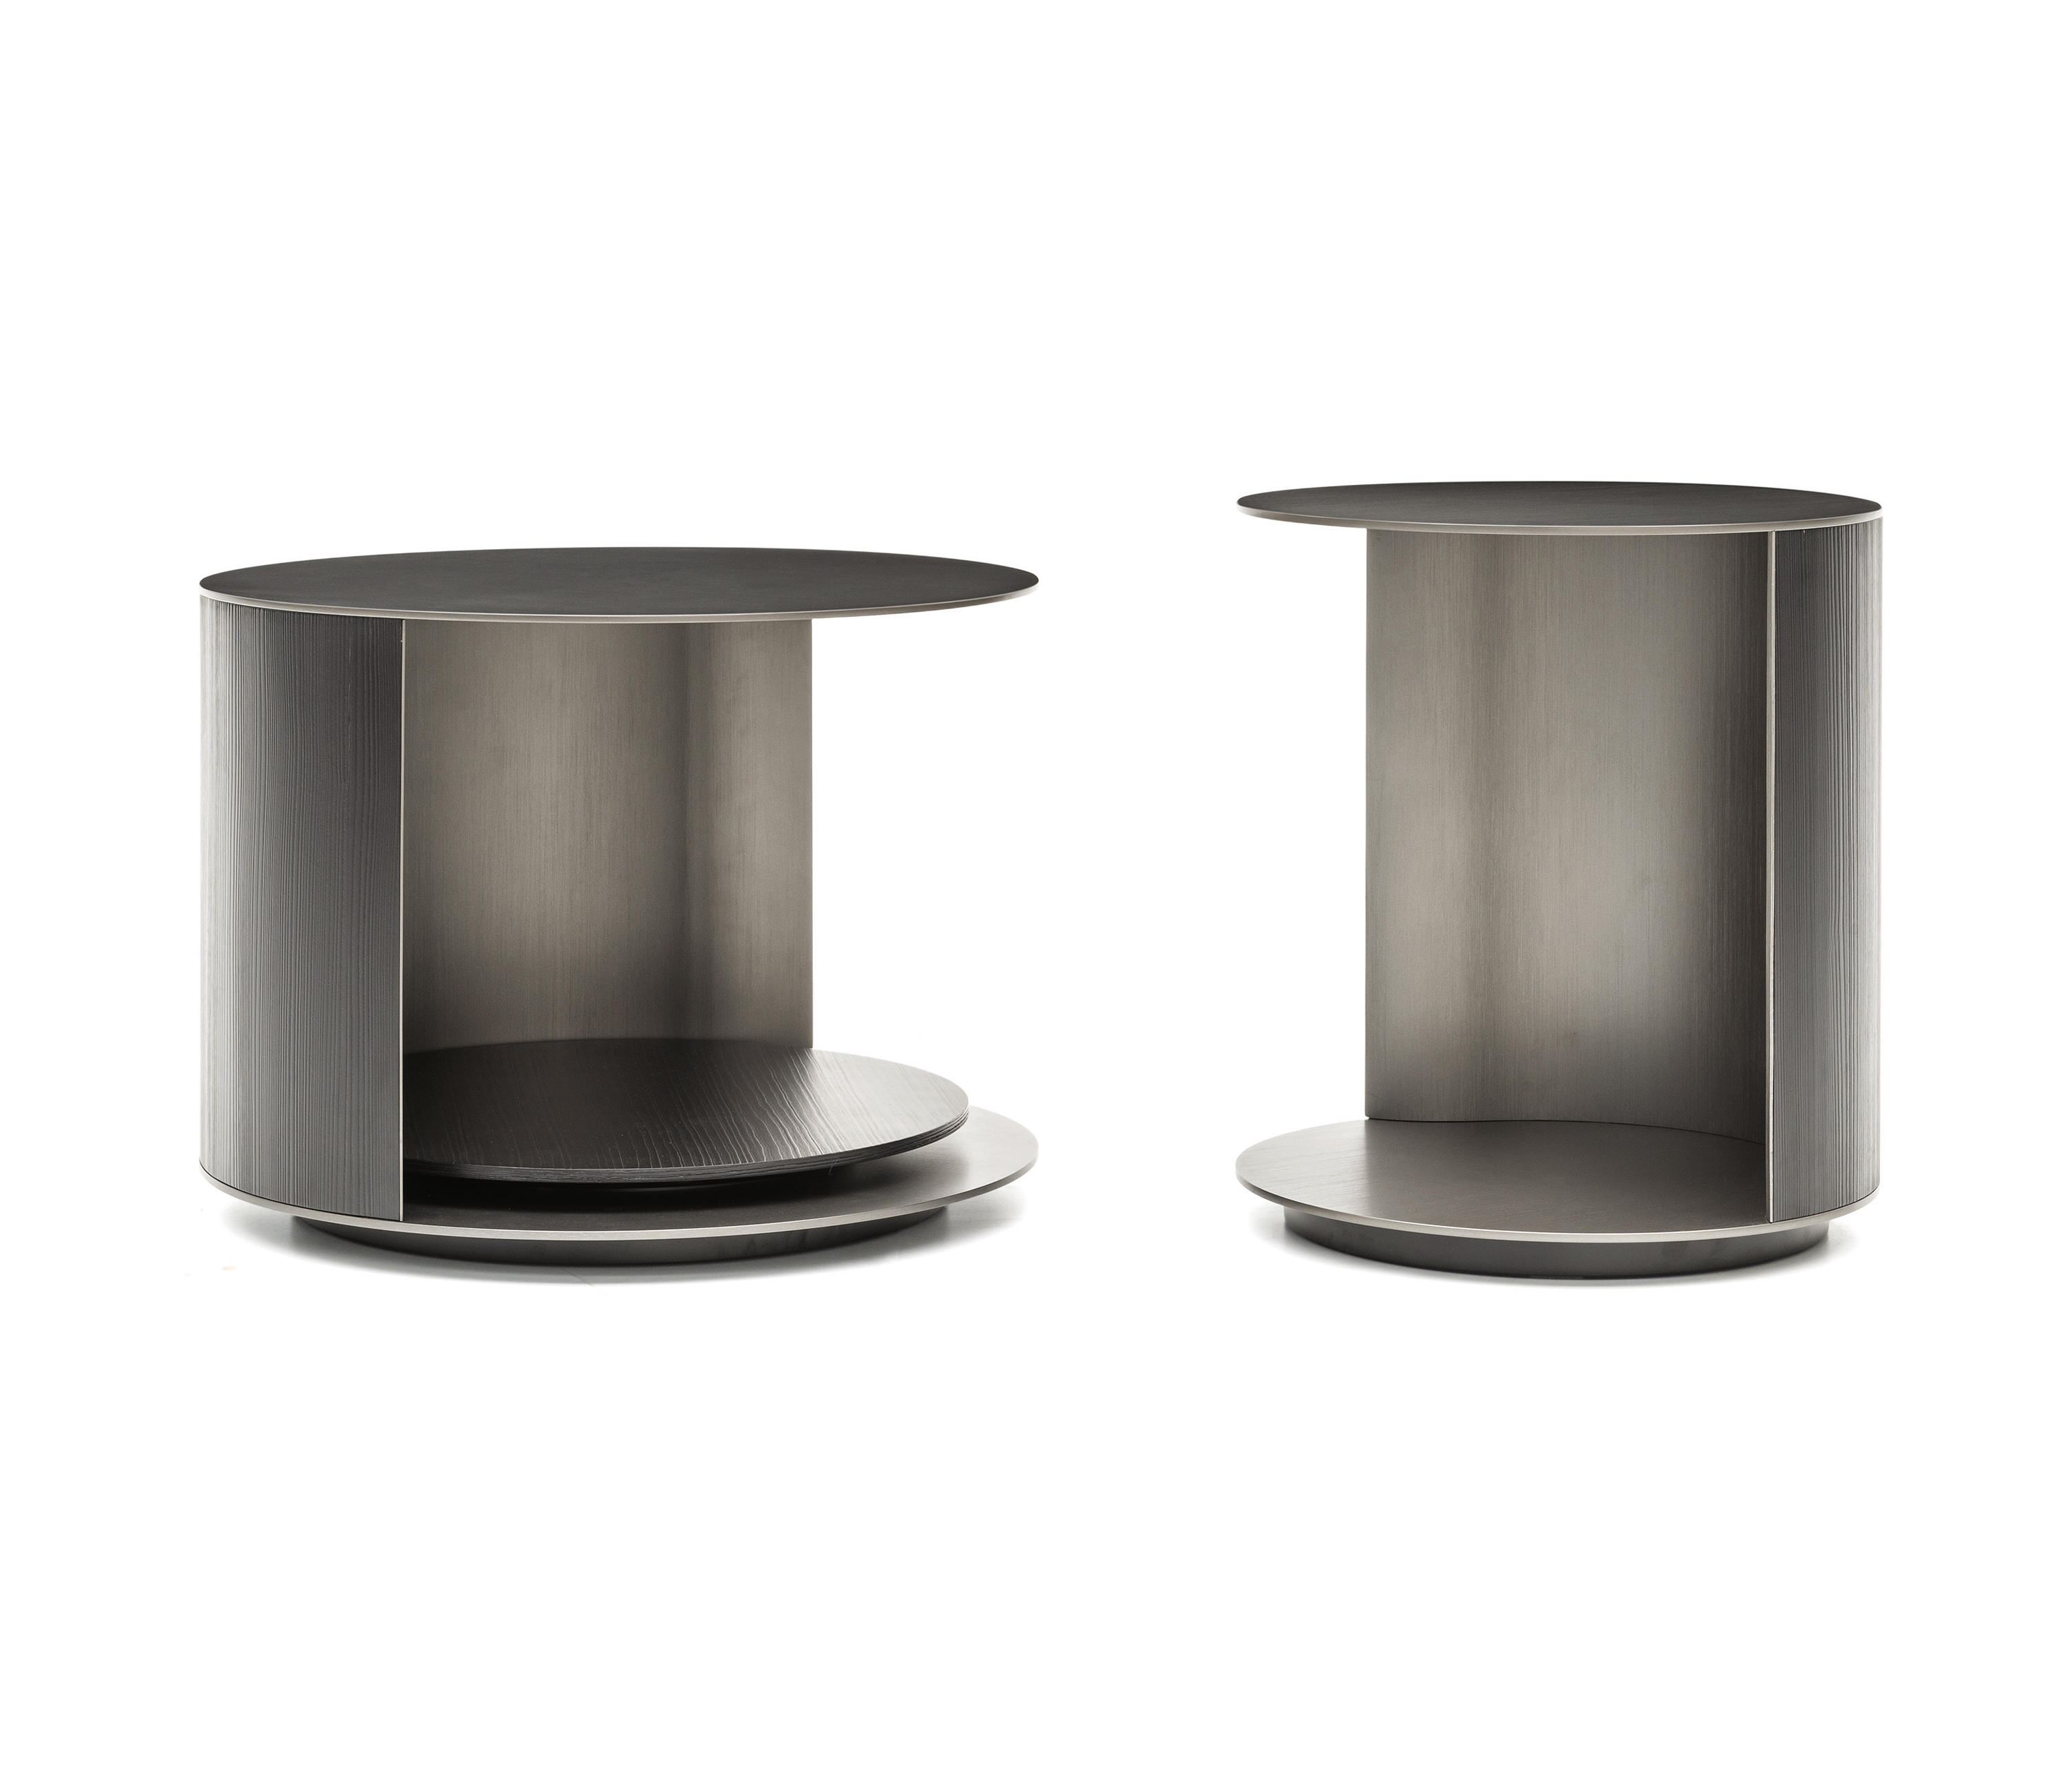 Richer Side Table by Minotti